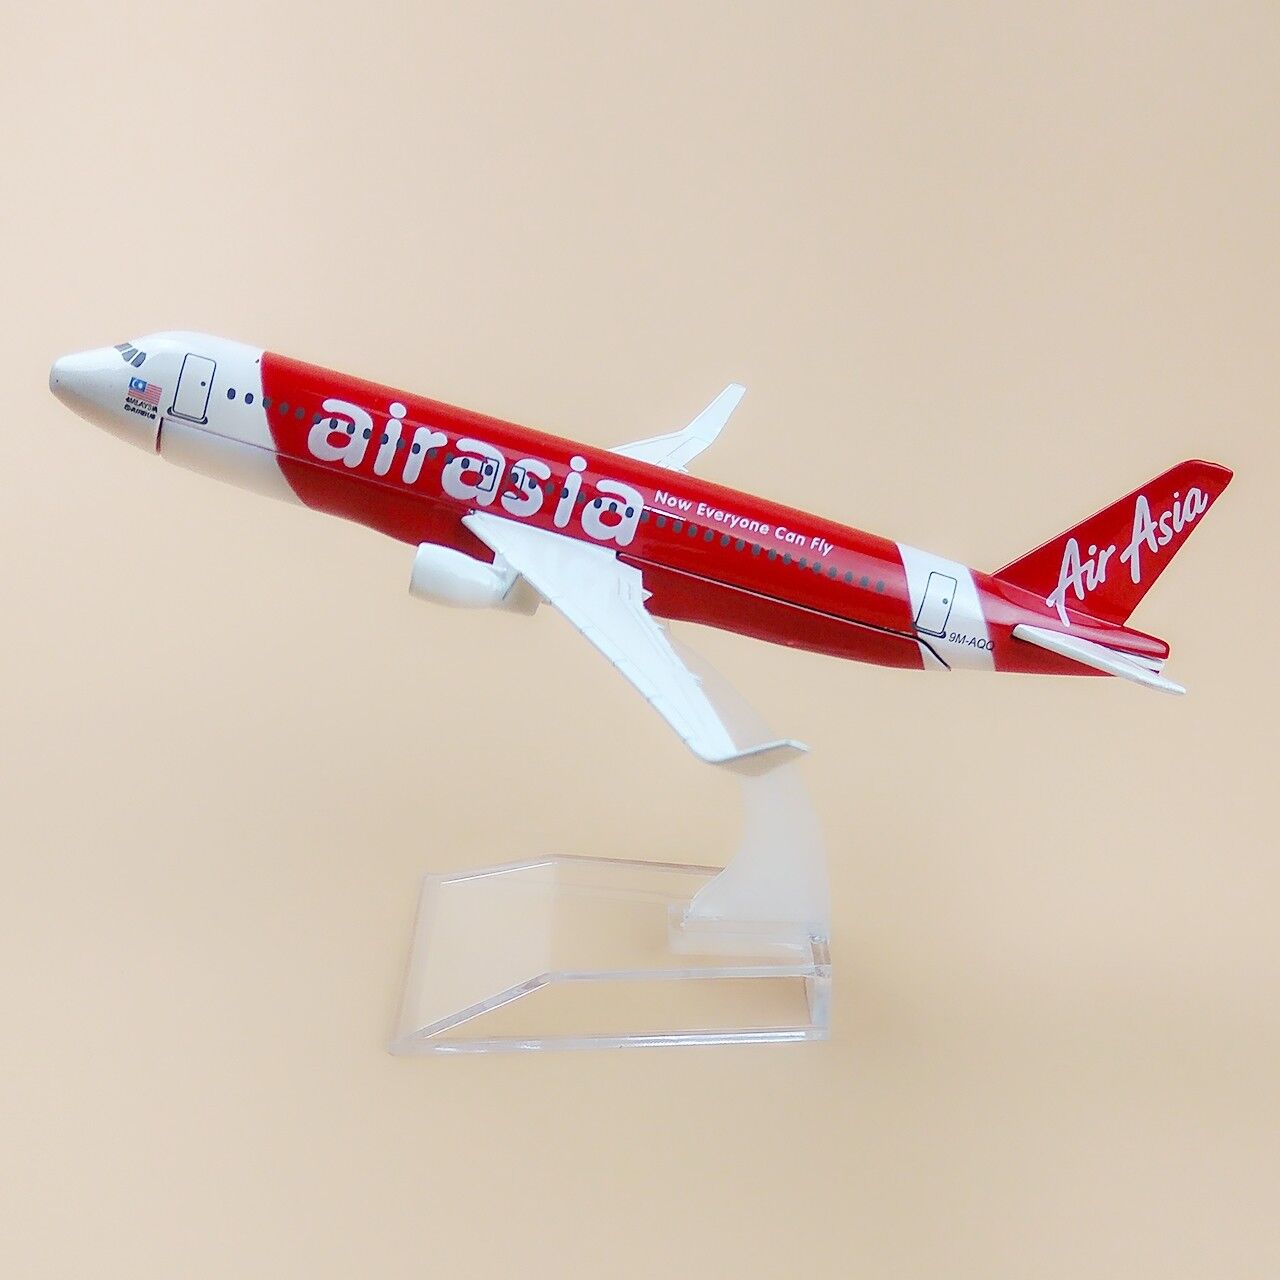 16cm Air Asia Airlines Airbus A320 Aircraft Diecast Airplane Model Plane Red